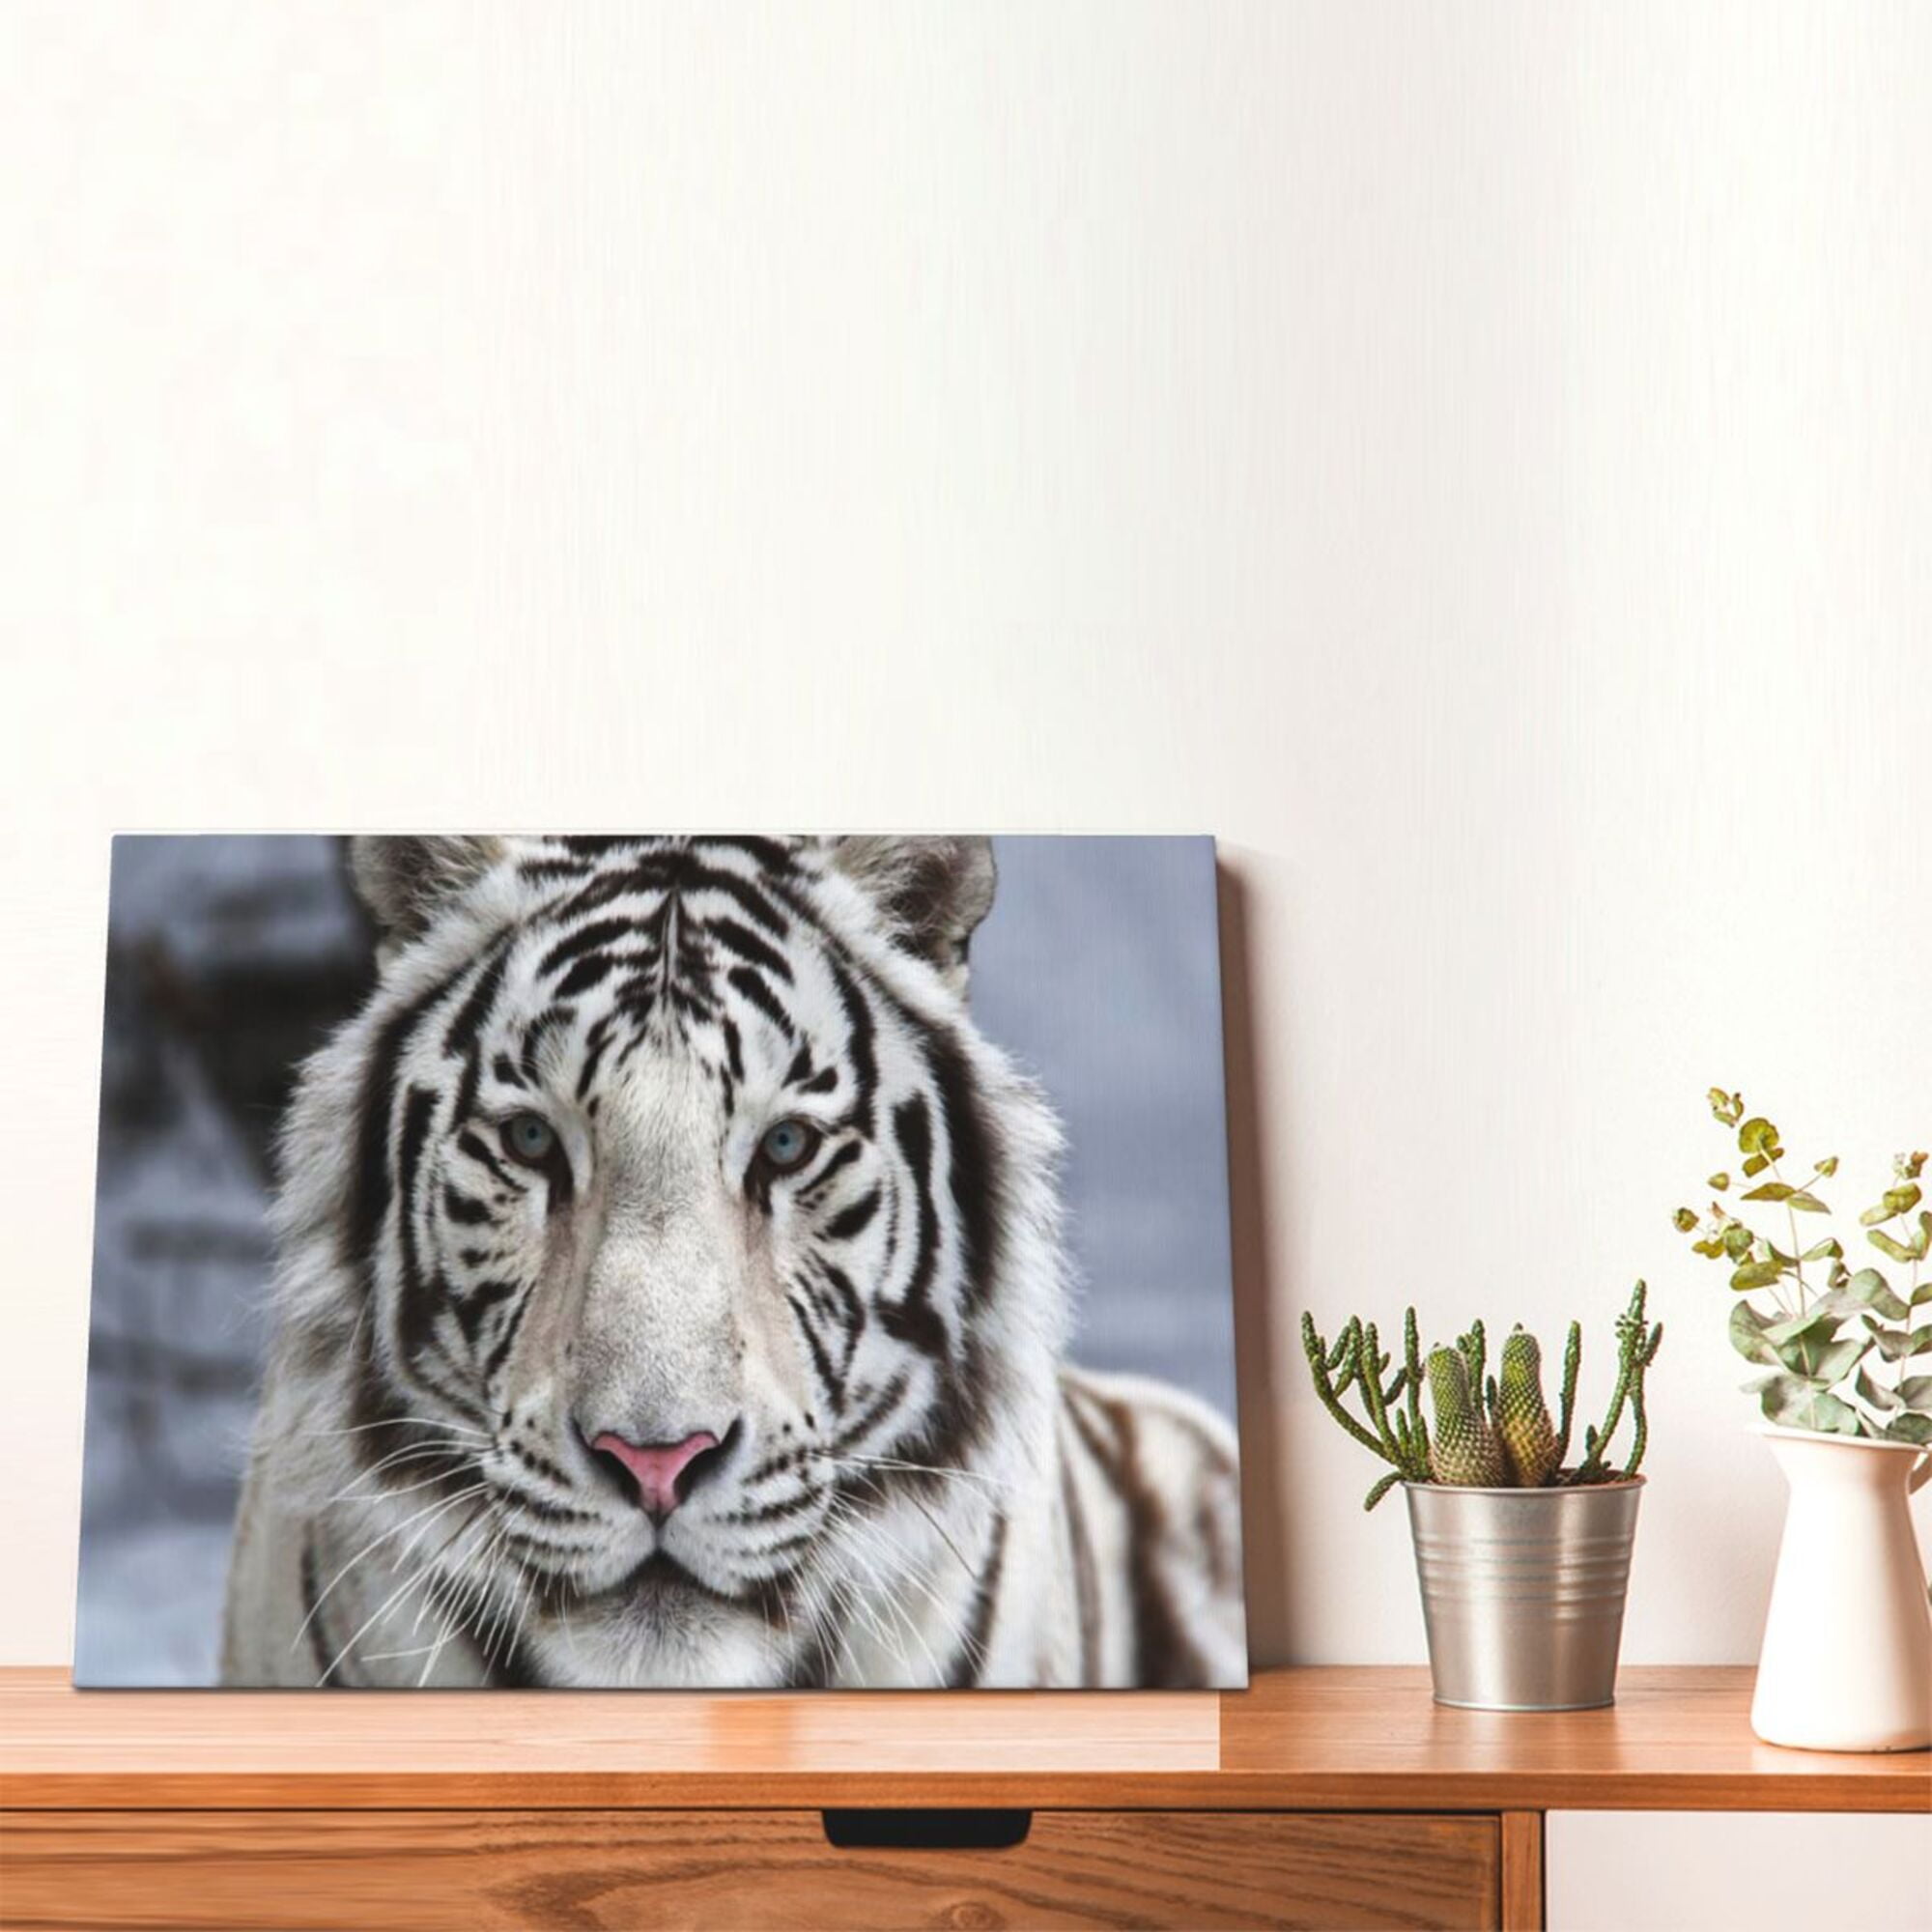 Wall White Room Decor Canvas Decorations For Painting Modern Decor Bathroom Framed Bedroom Bathroom Artwork Living Tiger 12x16in